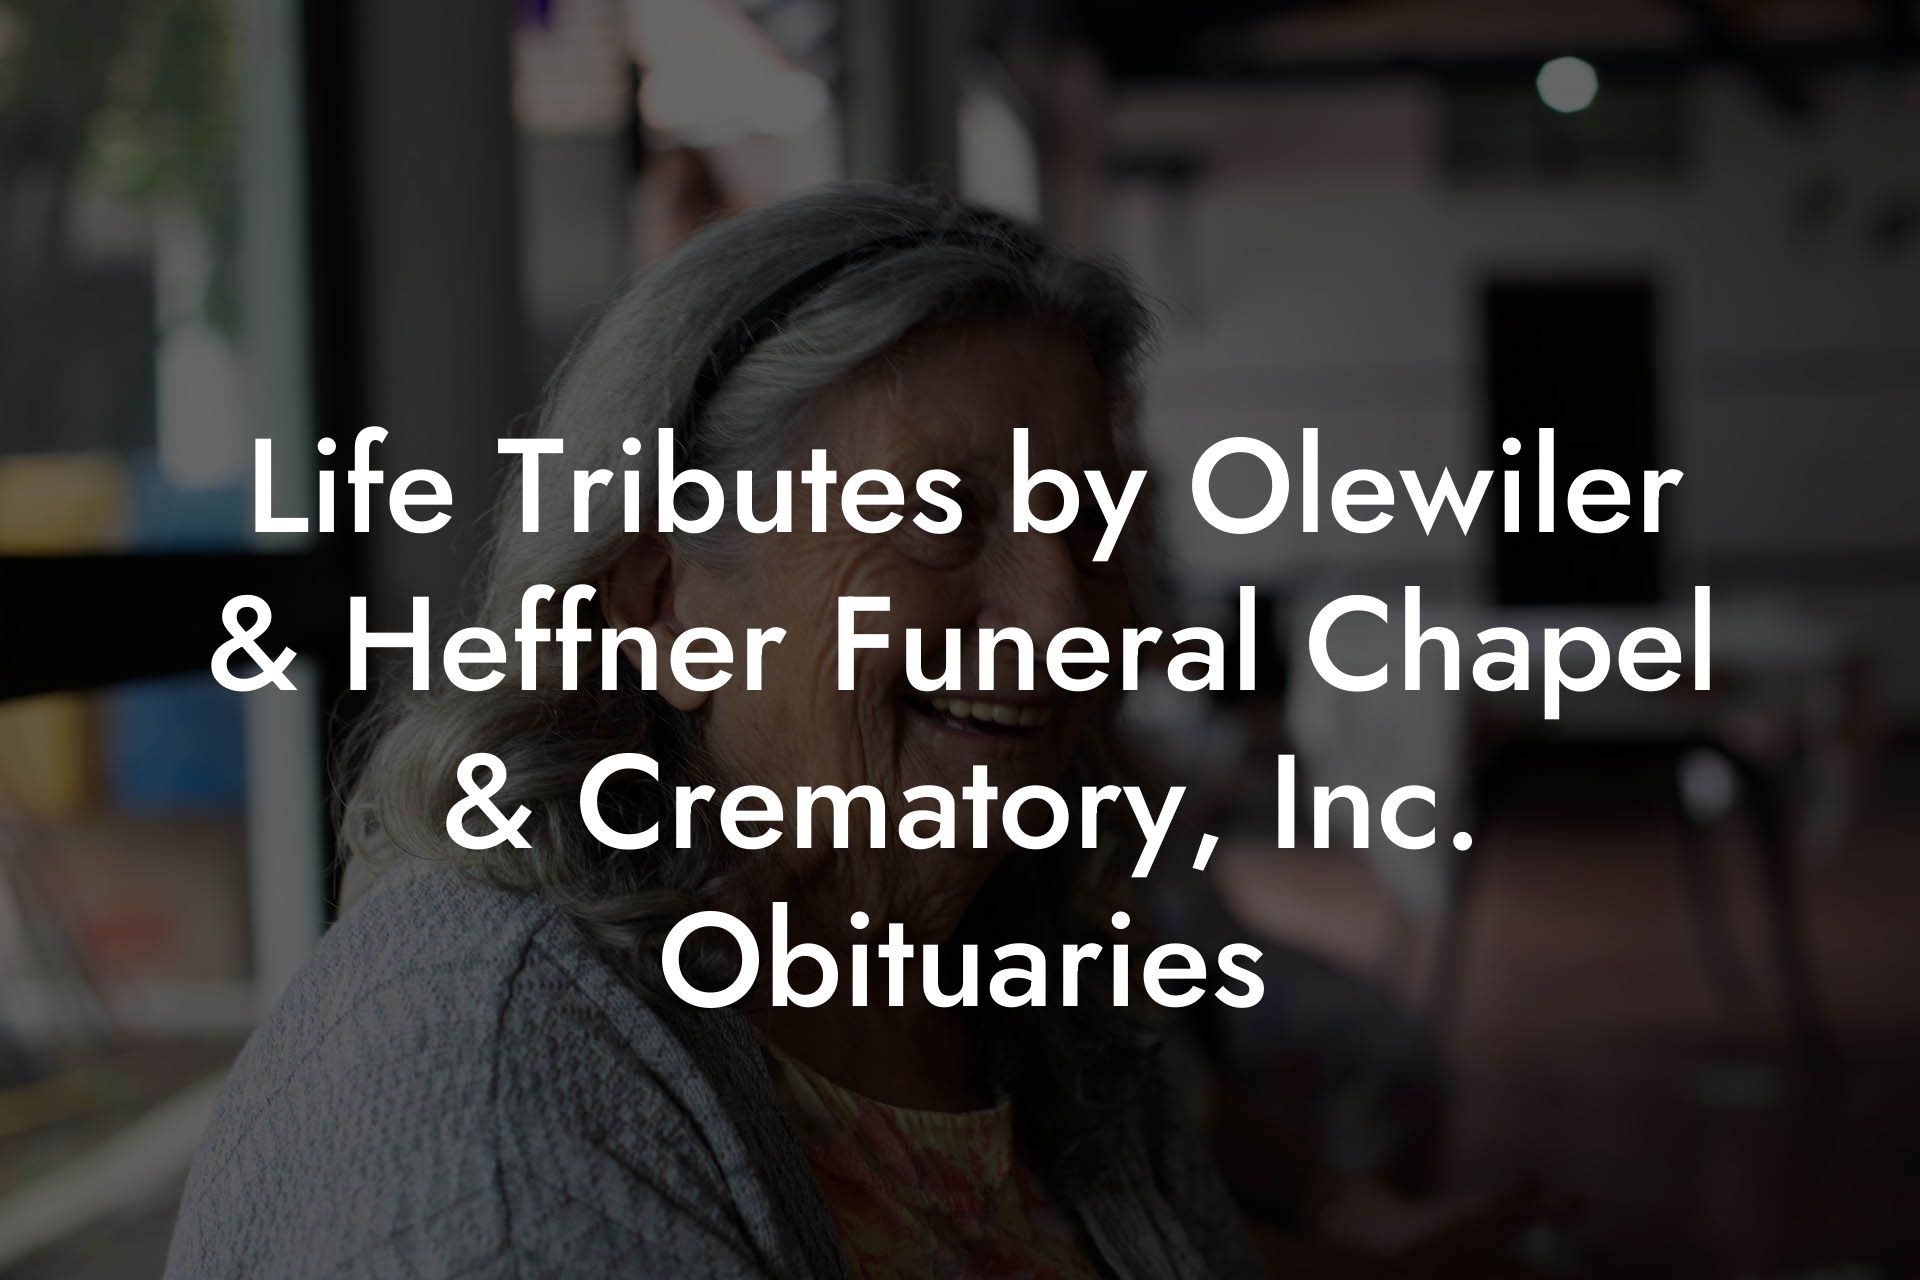 Life Tributes by Olewiler & Heffner Funeral Chapel & Crematory, Inc. Obituaries